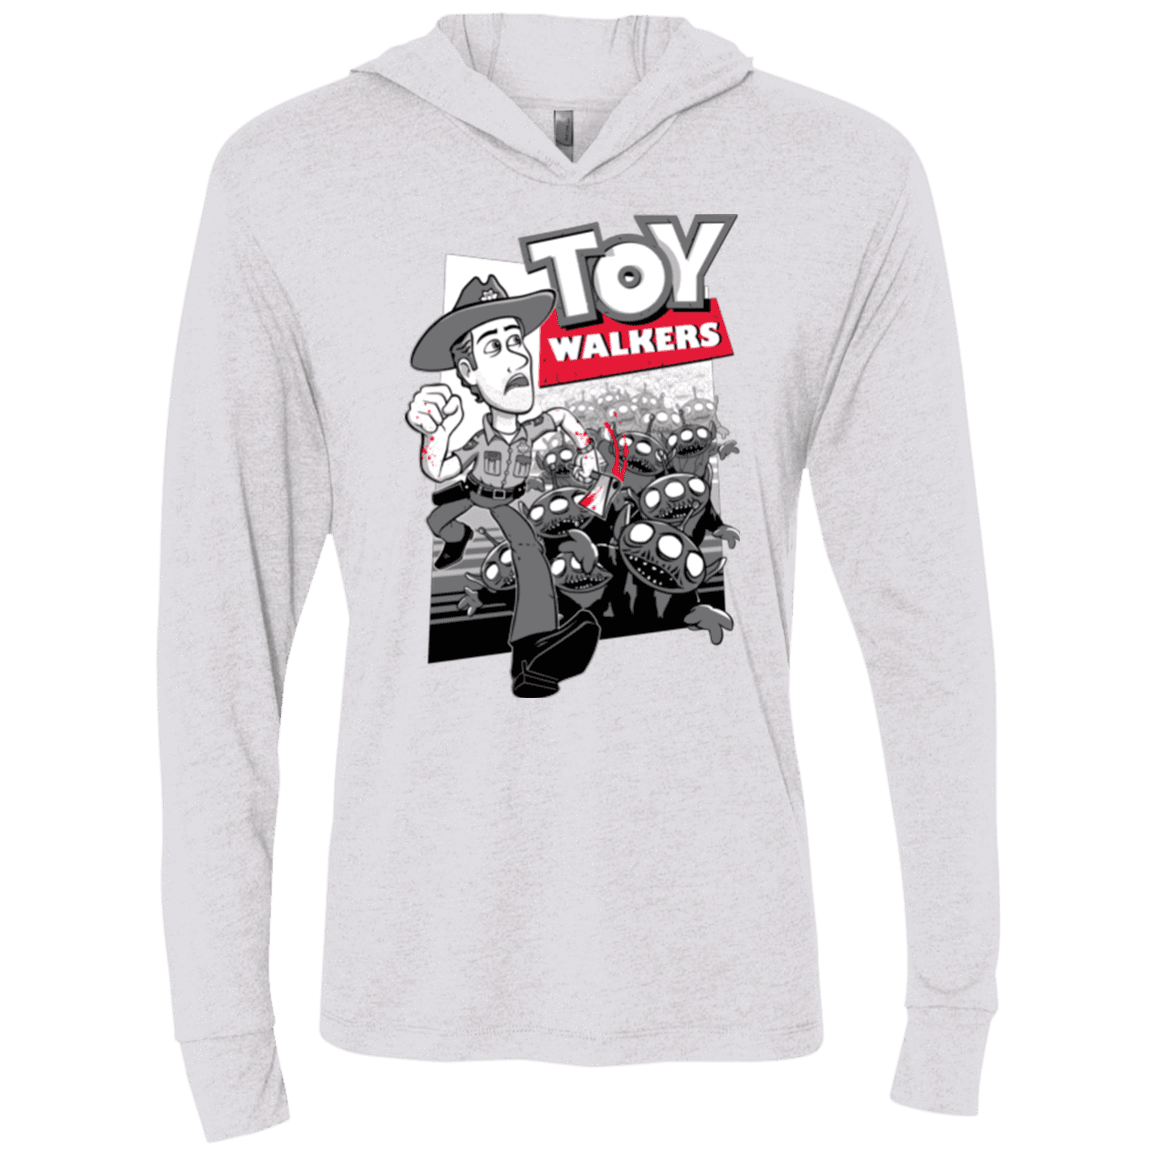 T-Shirts Heather White / X-Small Toy Walkers Triblend Long Sleeve Hoodie Tee